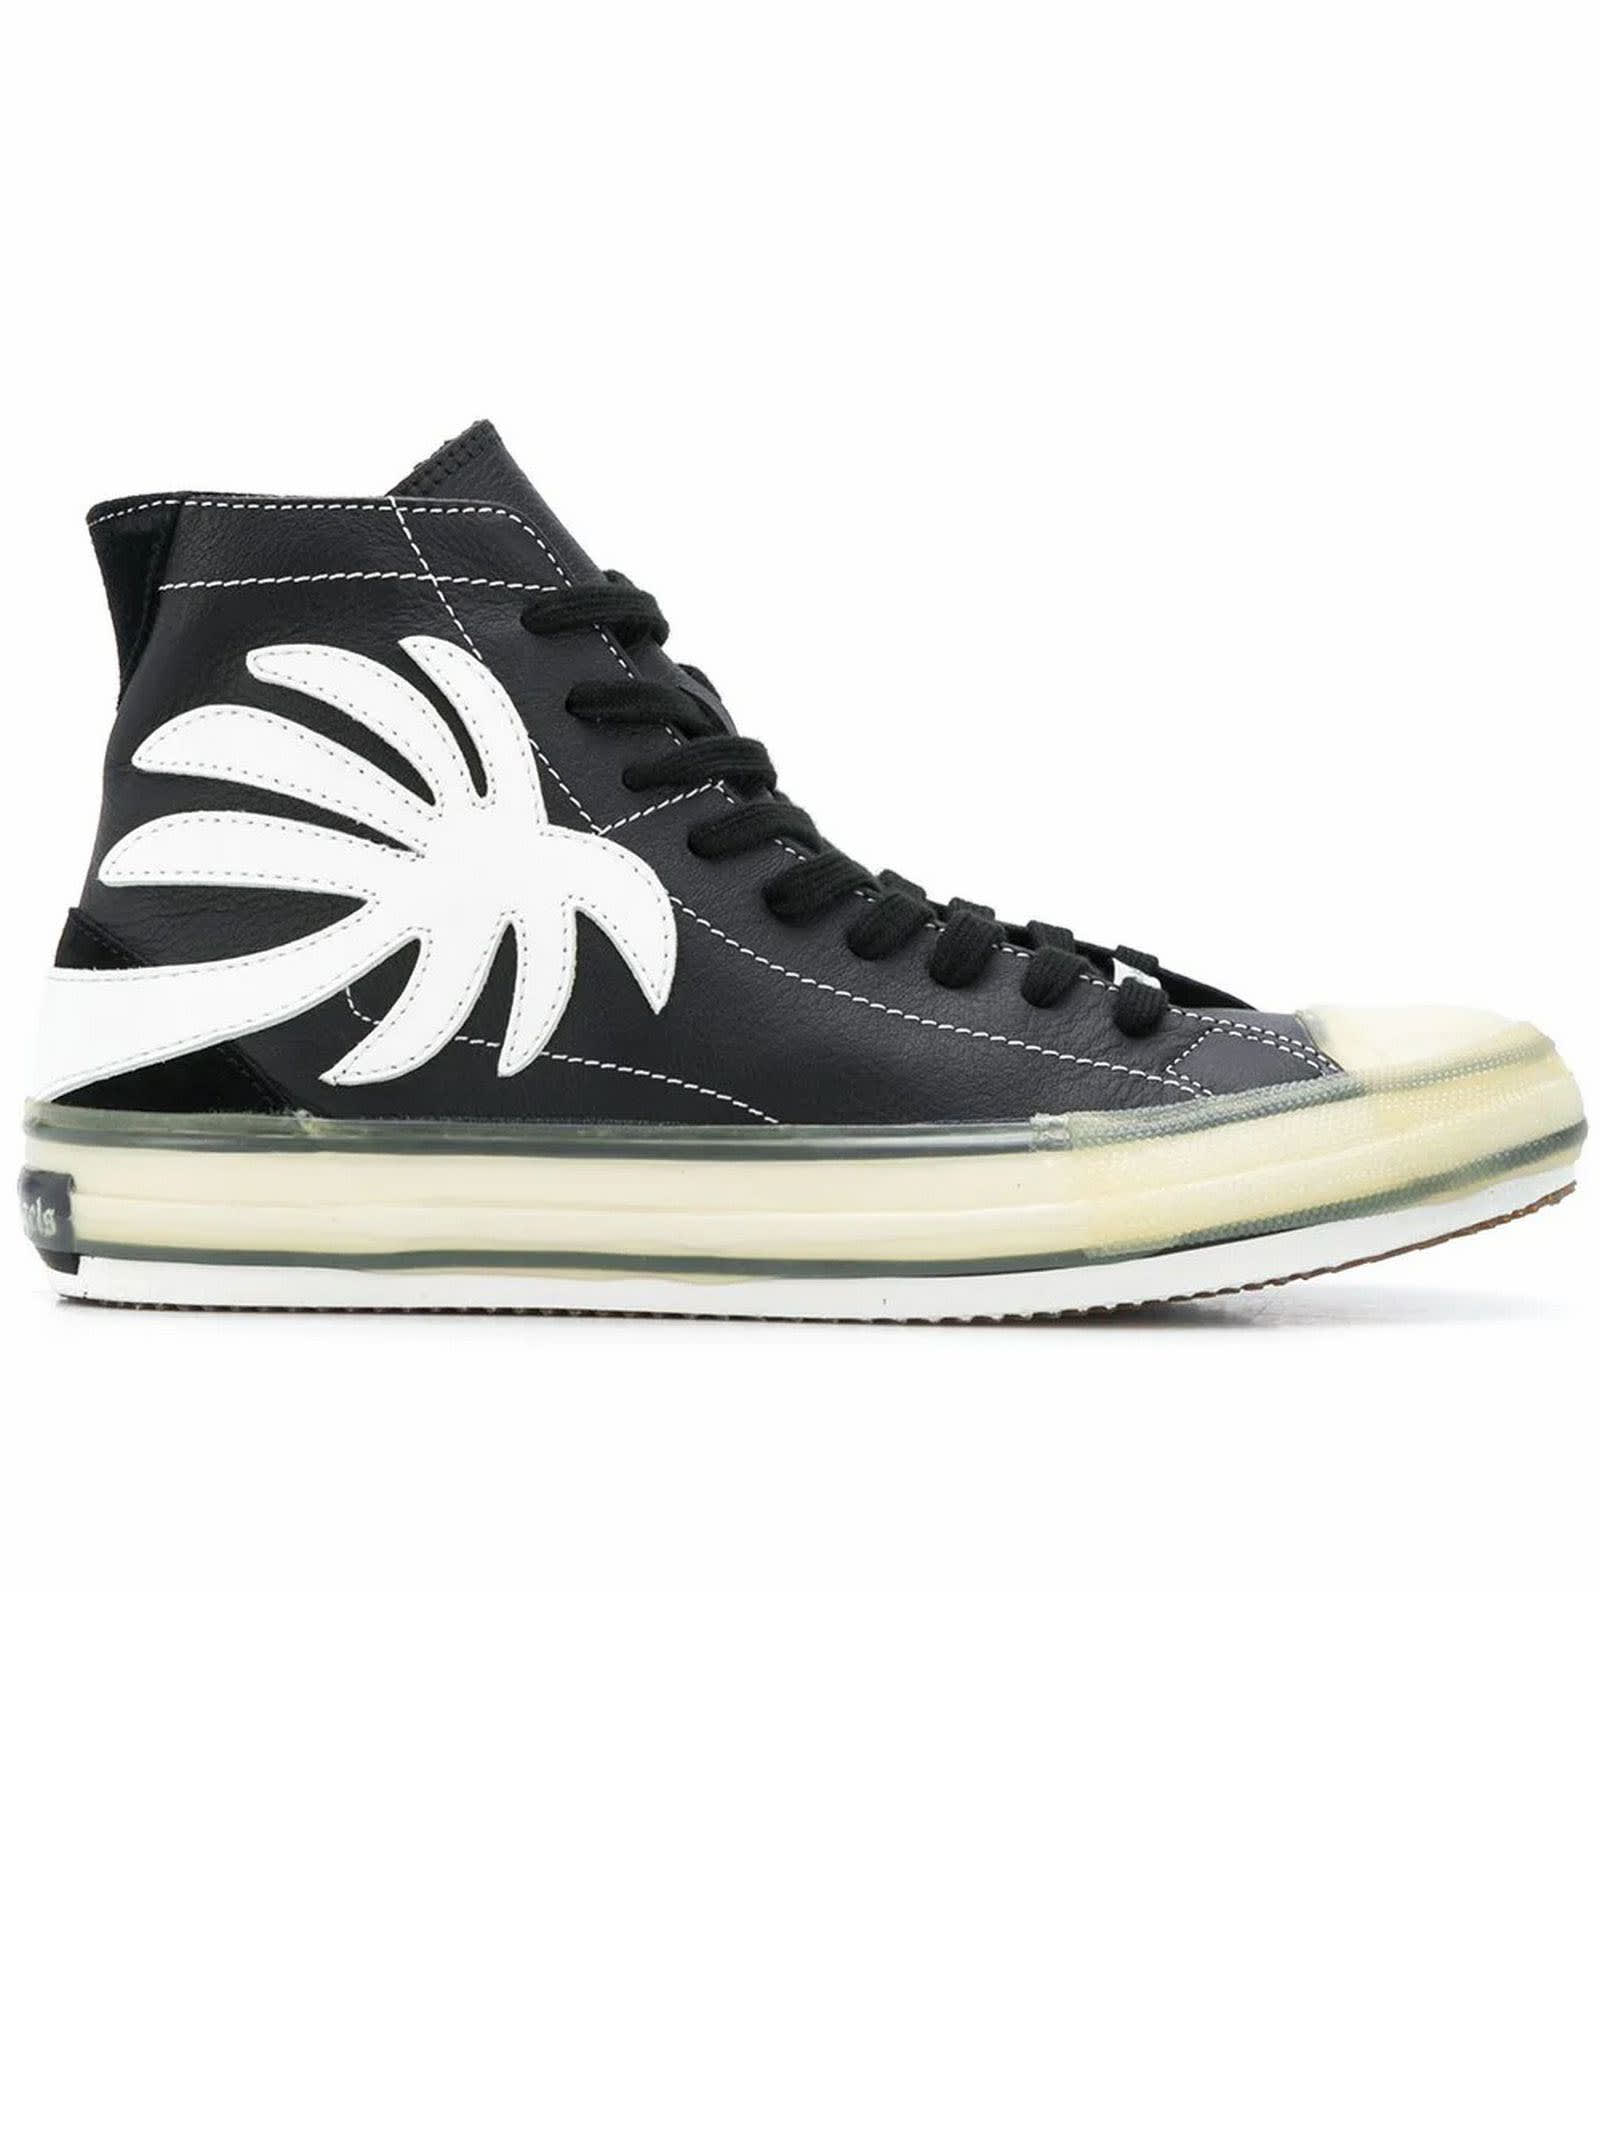 Palm Angels Black Leather High Top Sneakers